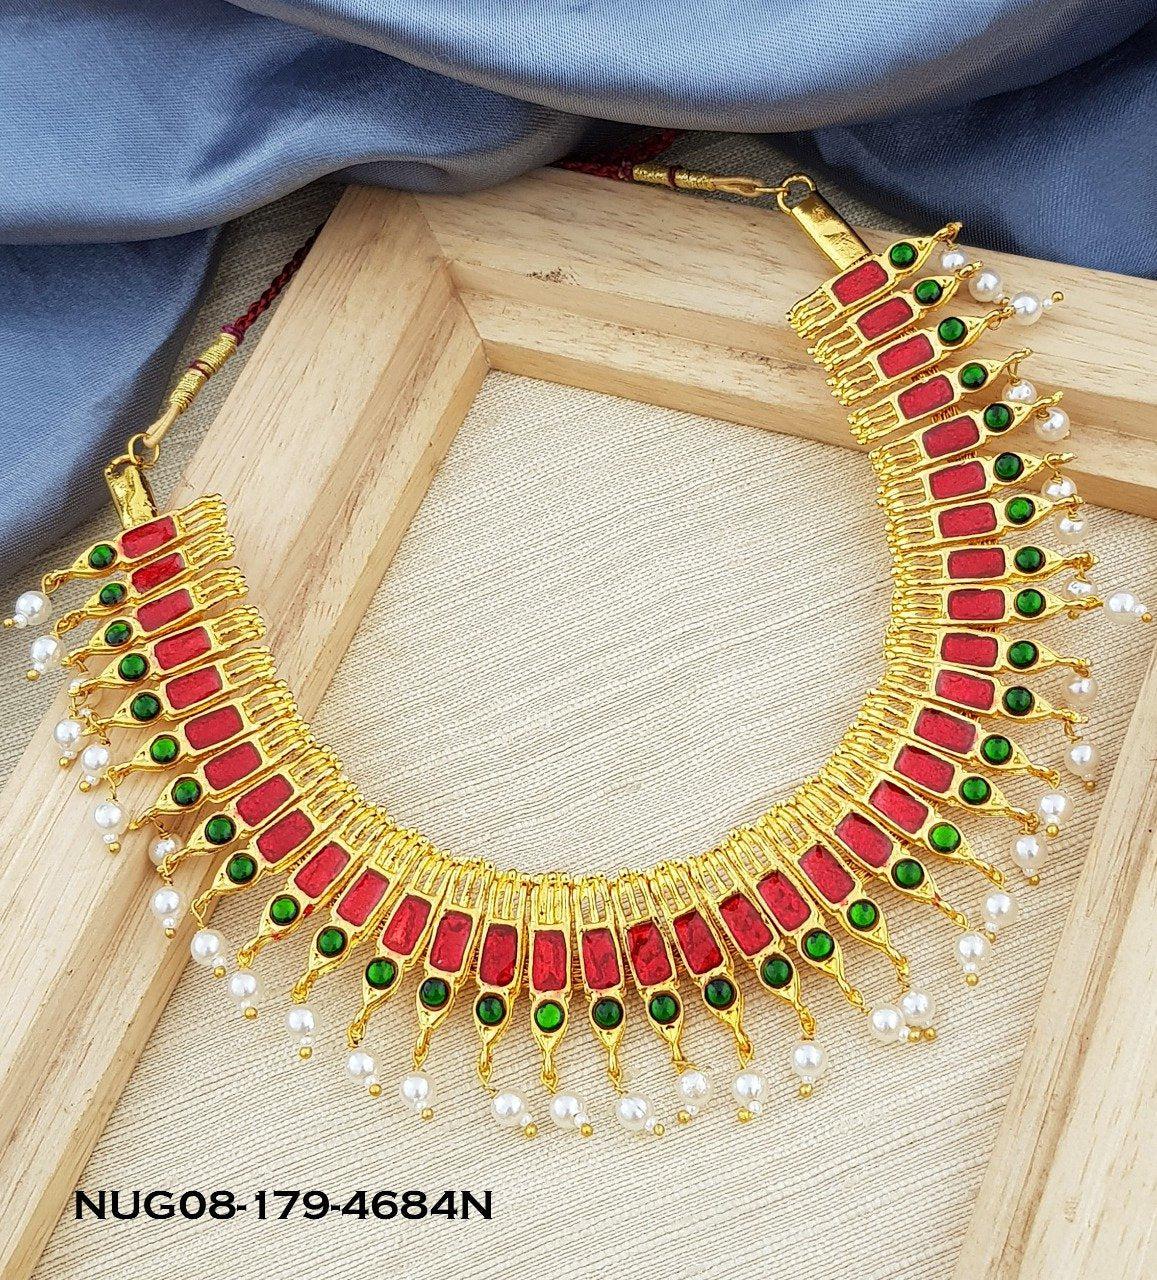 Micro Gold Plated Red Meena nagapadam necklace set suitable for Marriages Bharat Natyam and occasions 4684N